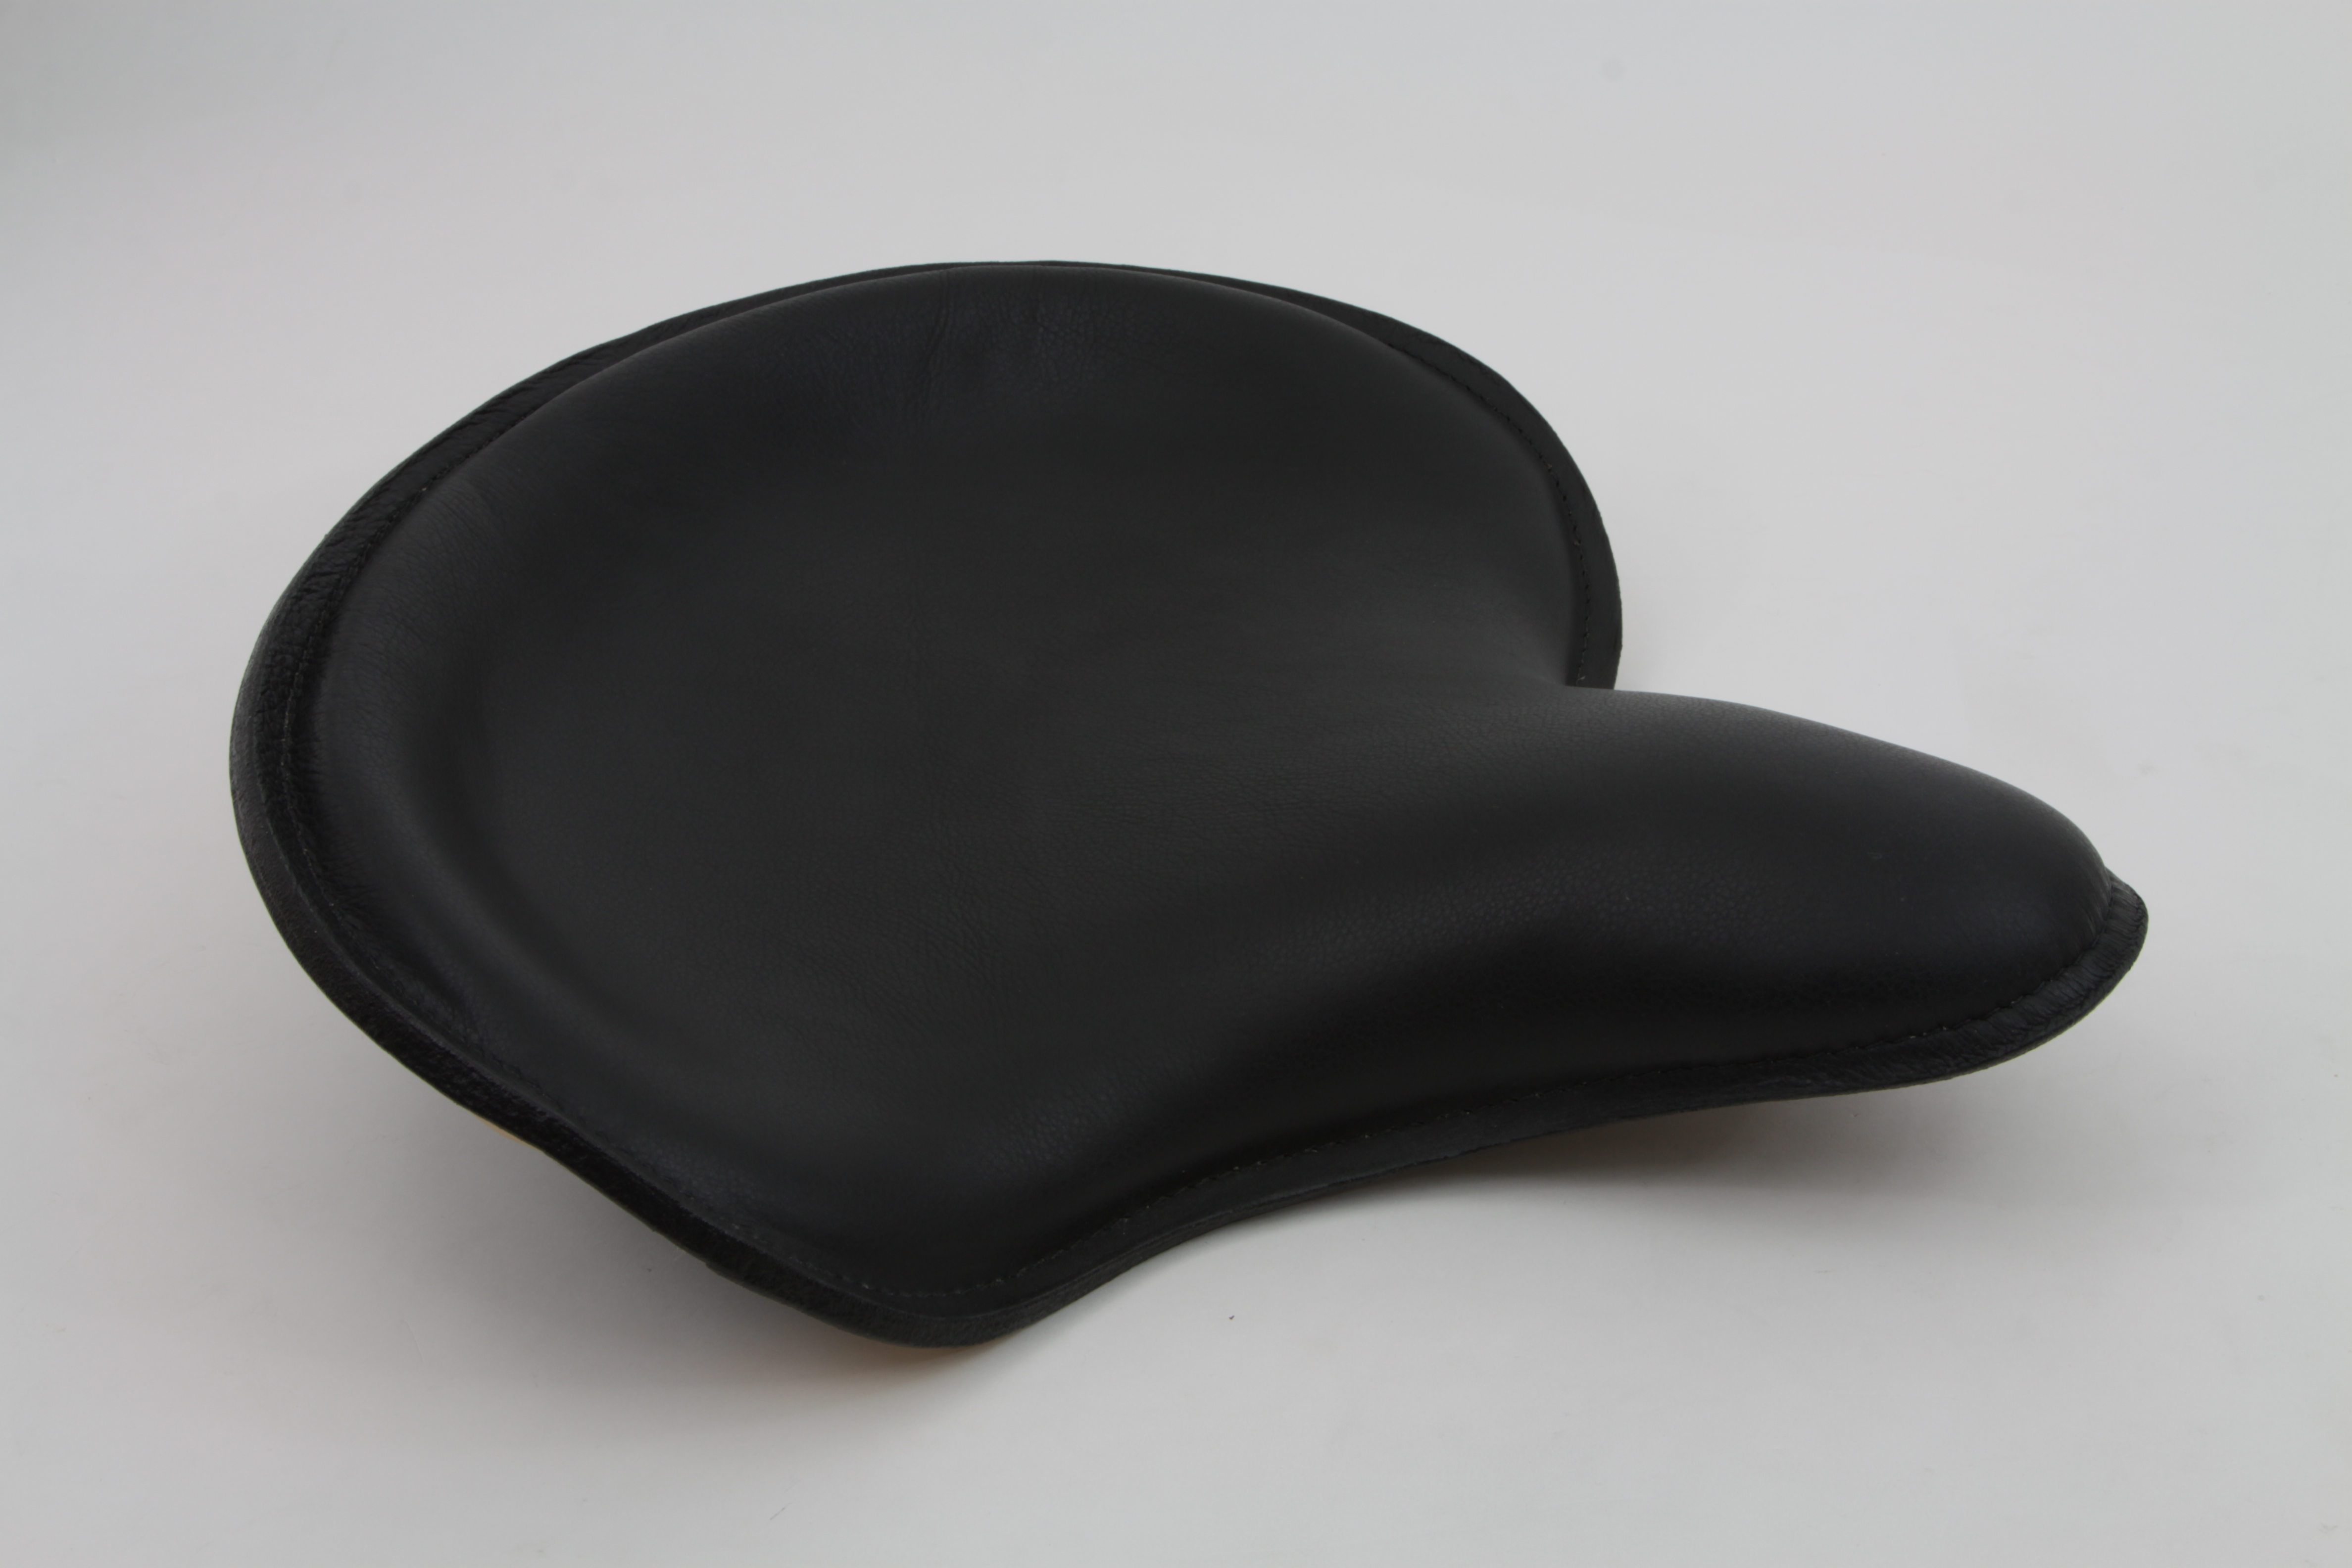 Black Solo Seat with Distressed Black Finish